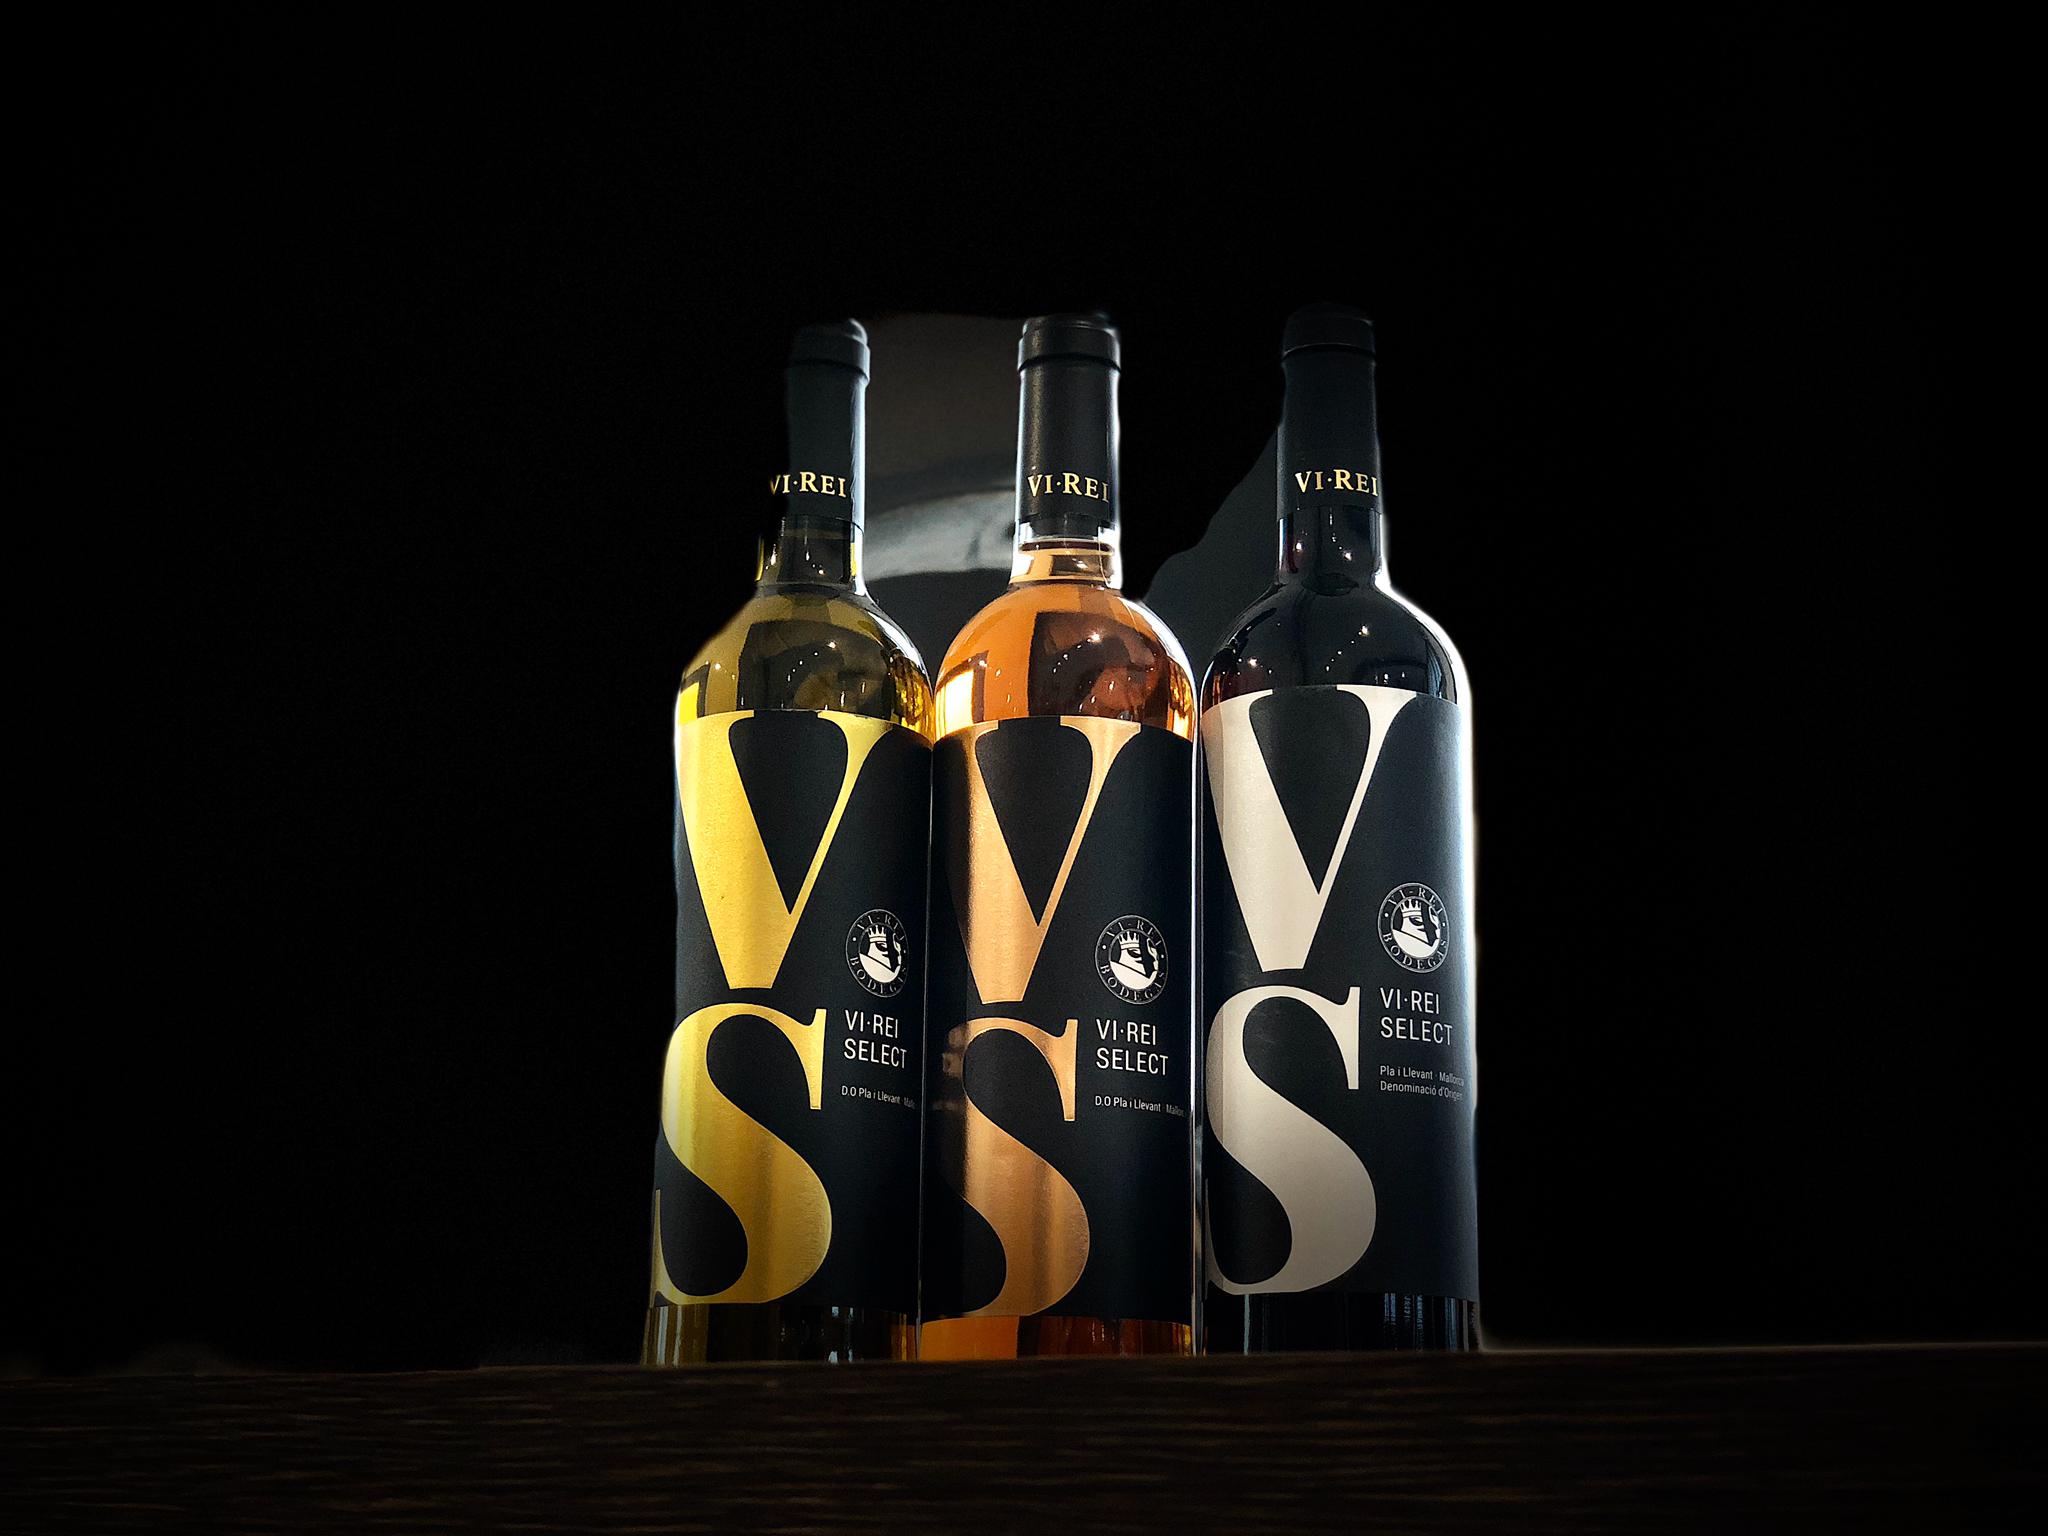 Image with different wines from Bodegas Vi Rei